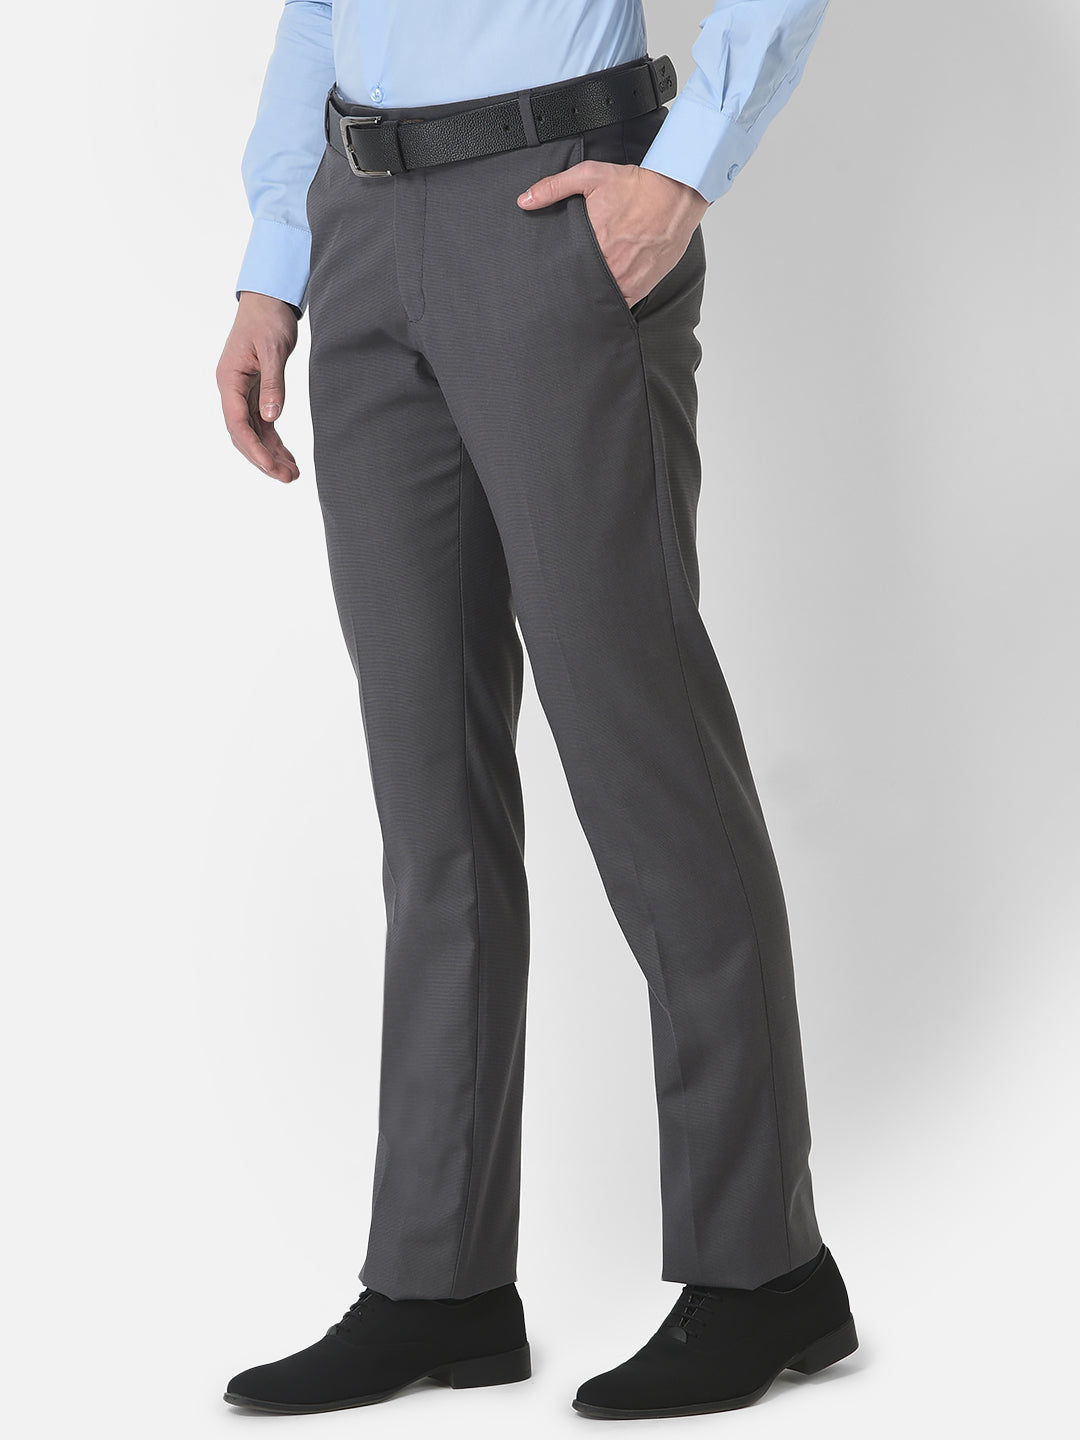 Sojanya (Since 1958) Men's Cotton Blend Charcoal Grey Solid Formal Trousers